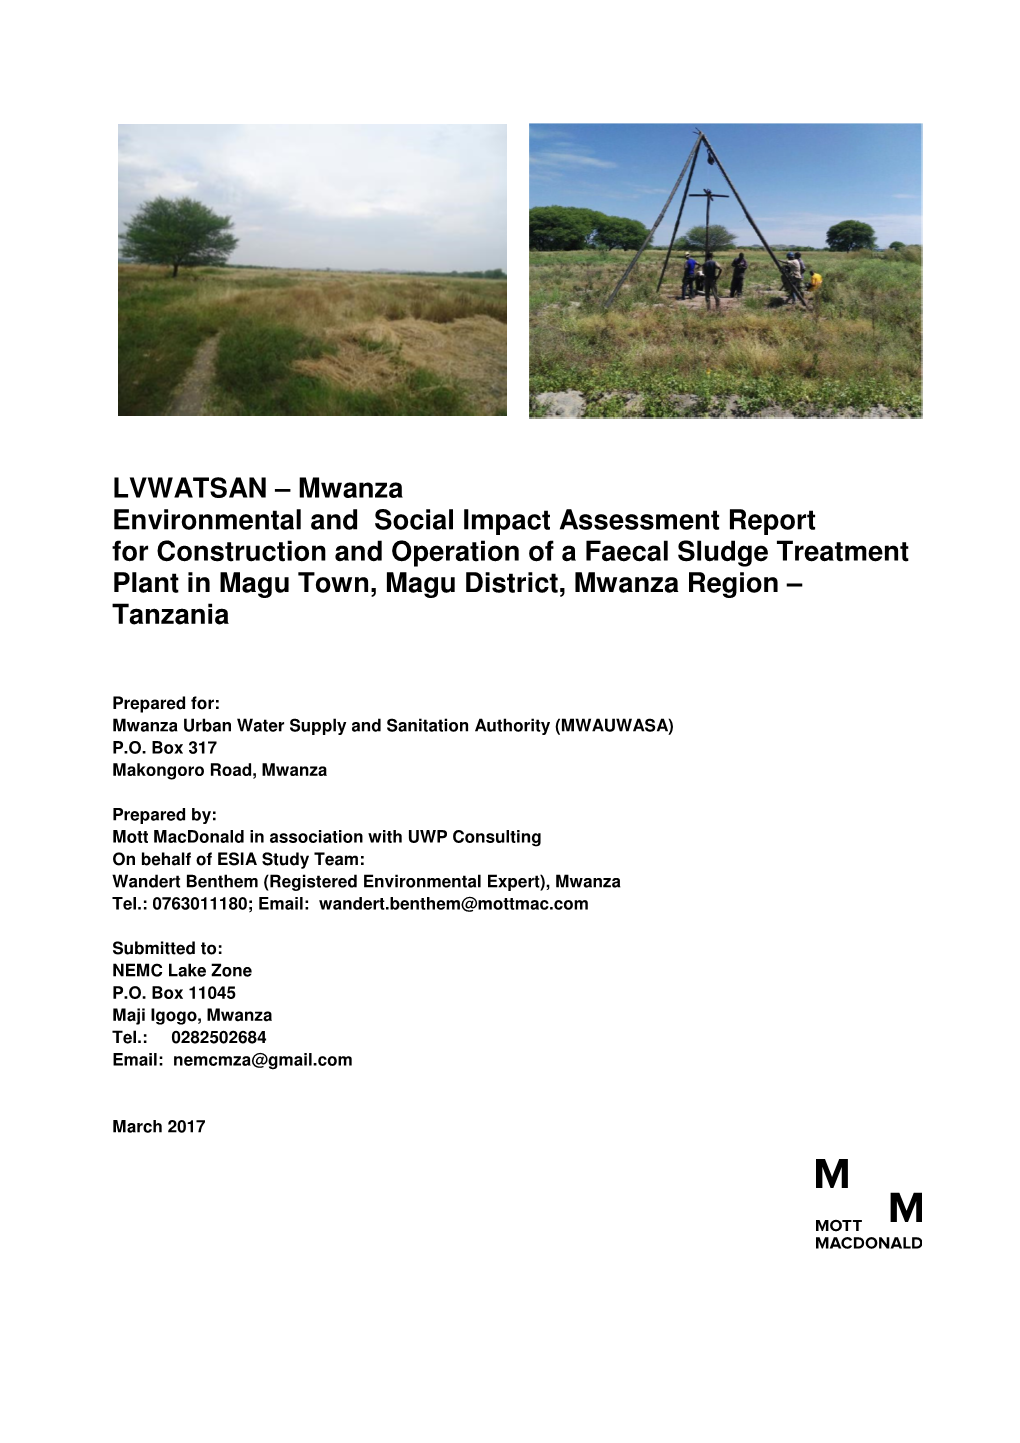 Mwanza Environmental and Social Impact Assessment Report for Construction and Operation of a Faecal Sludge Trea